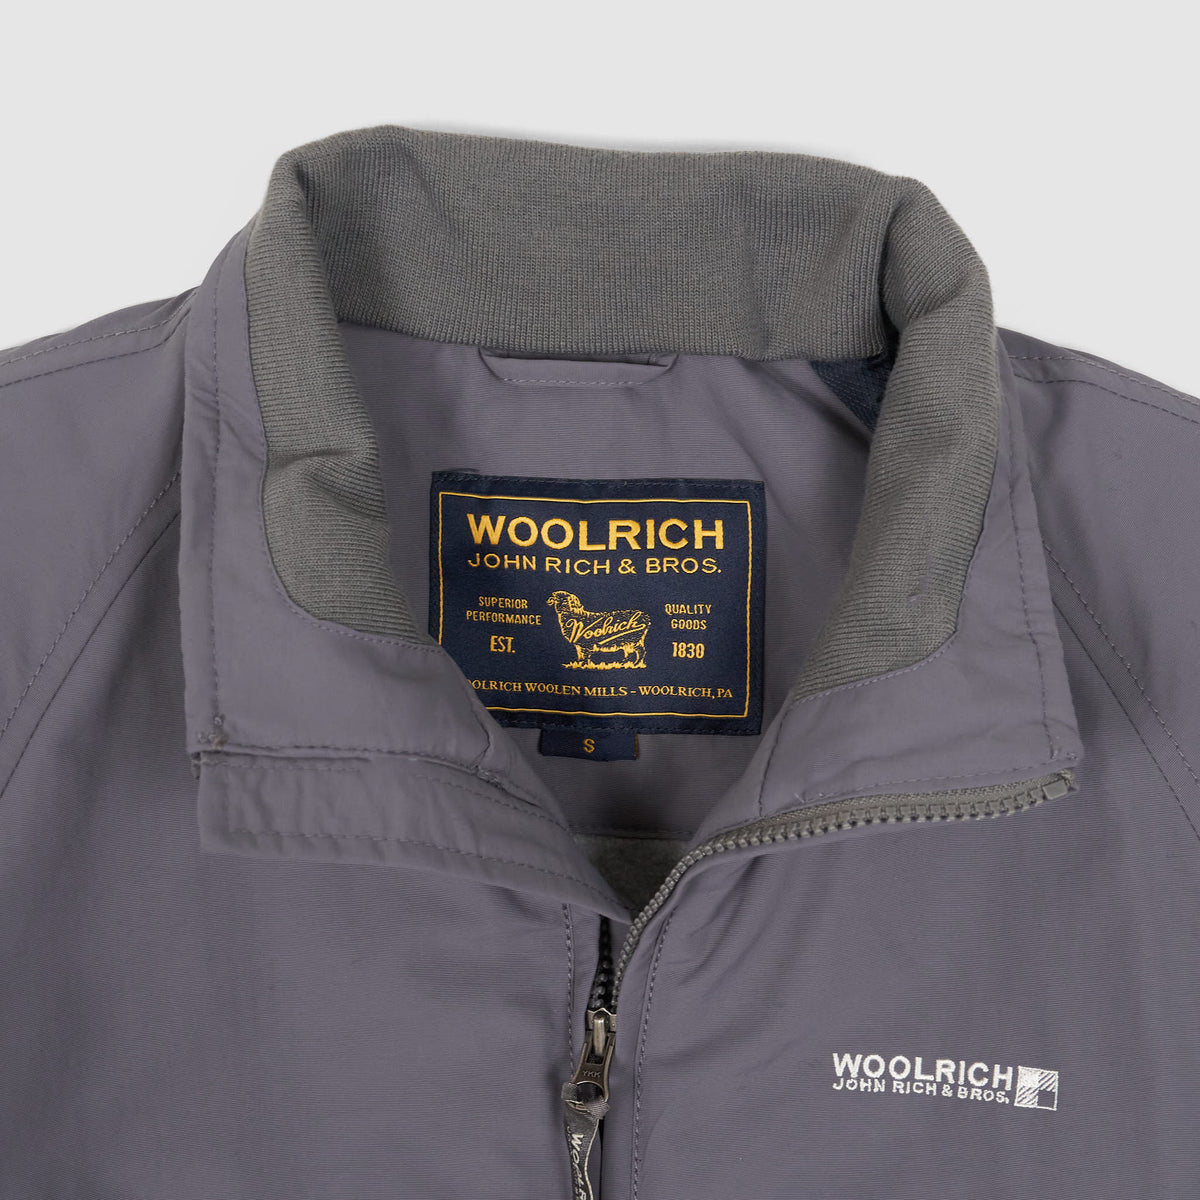 Woolrich Lumber Jacket with POLARTEC® Pile Lining